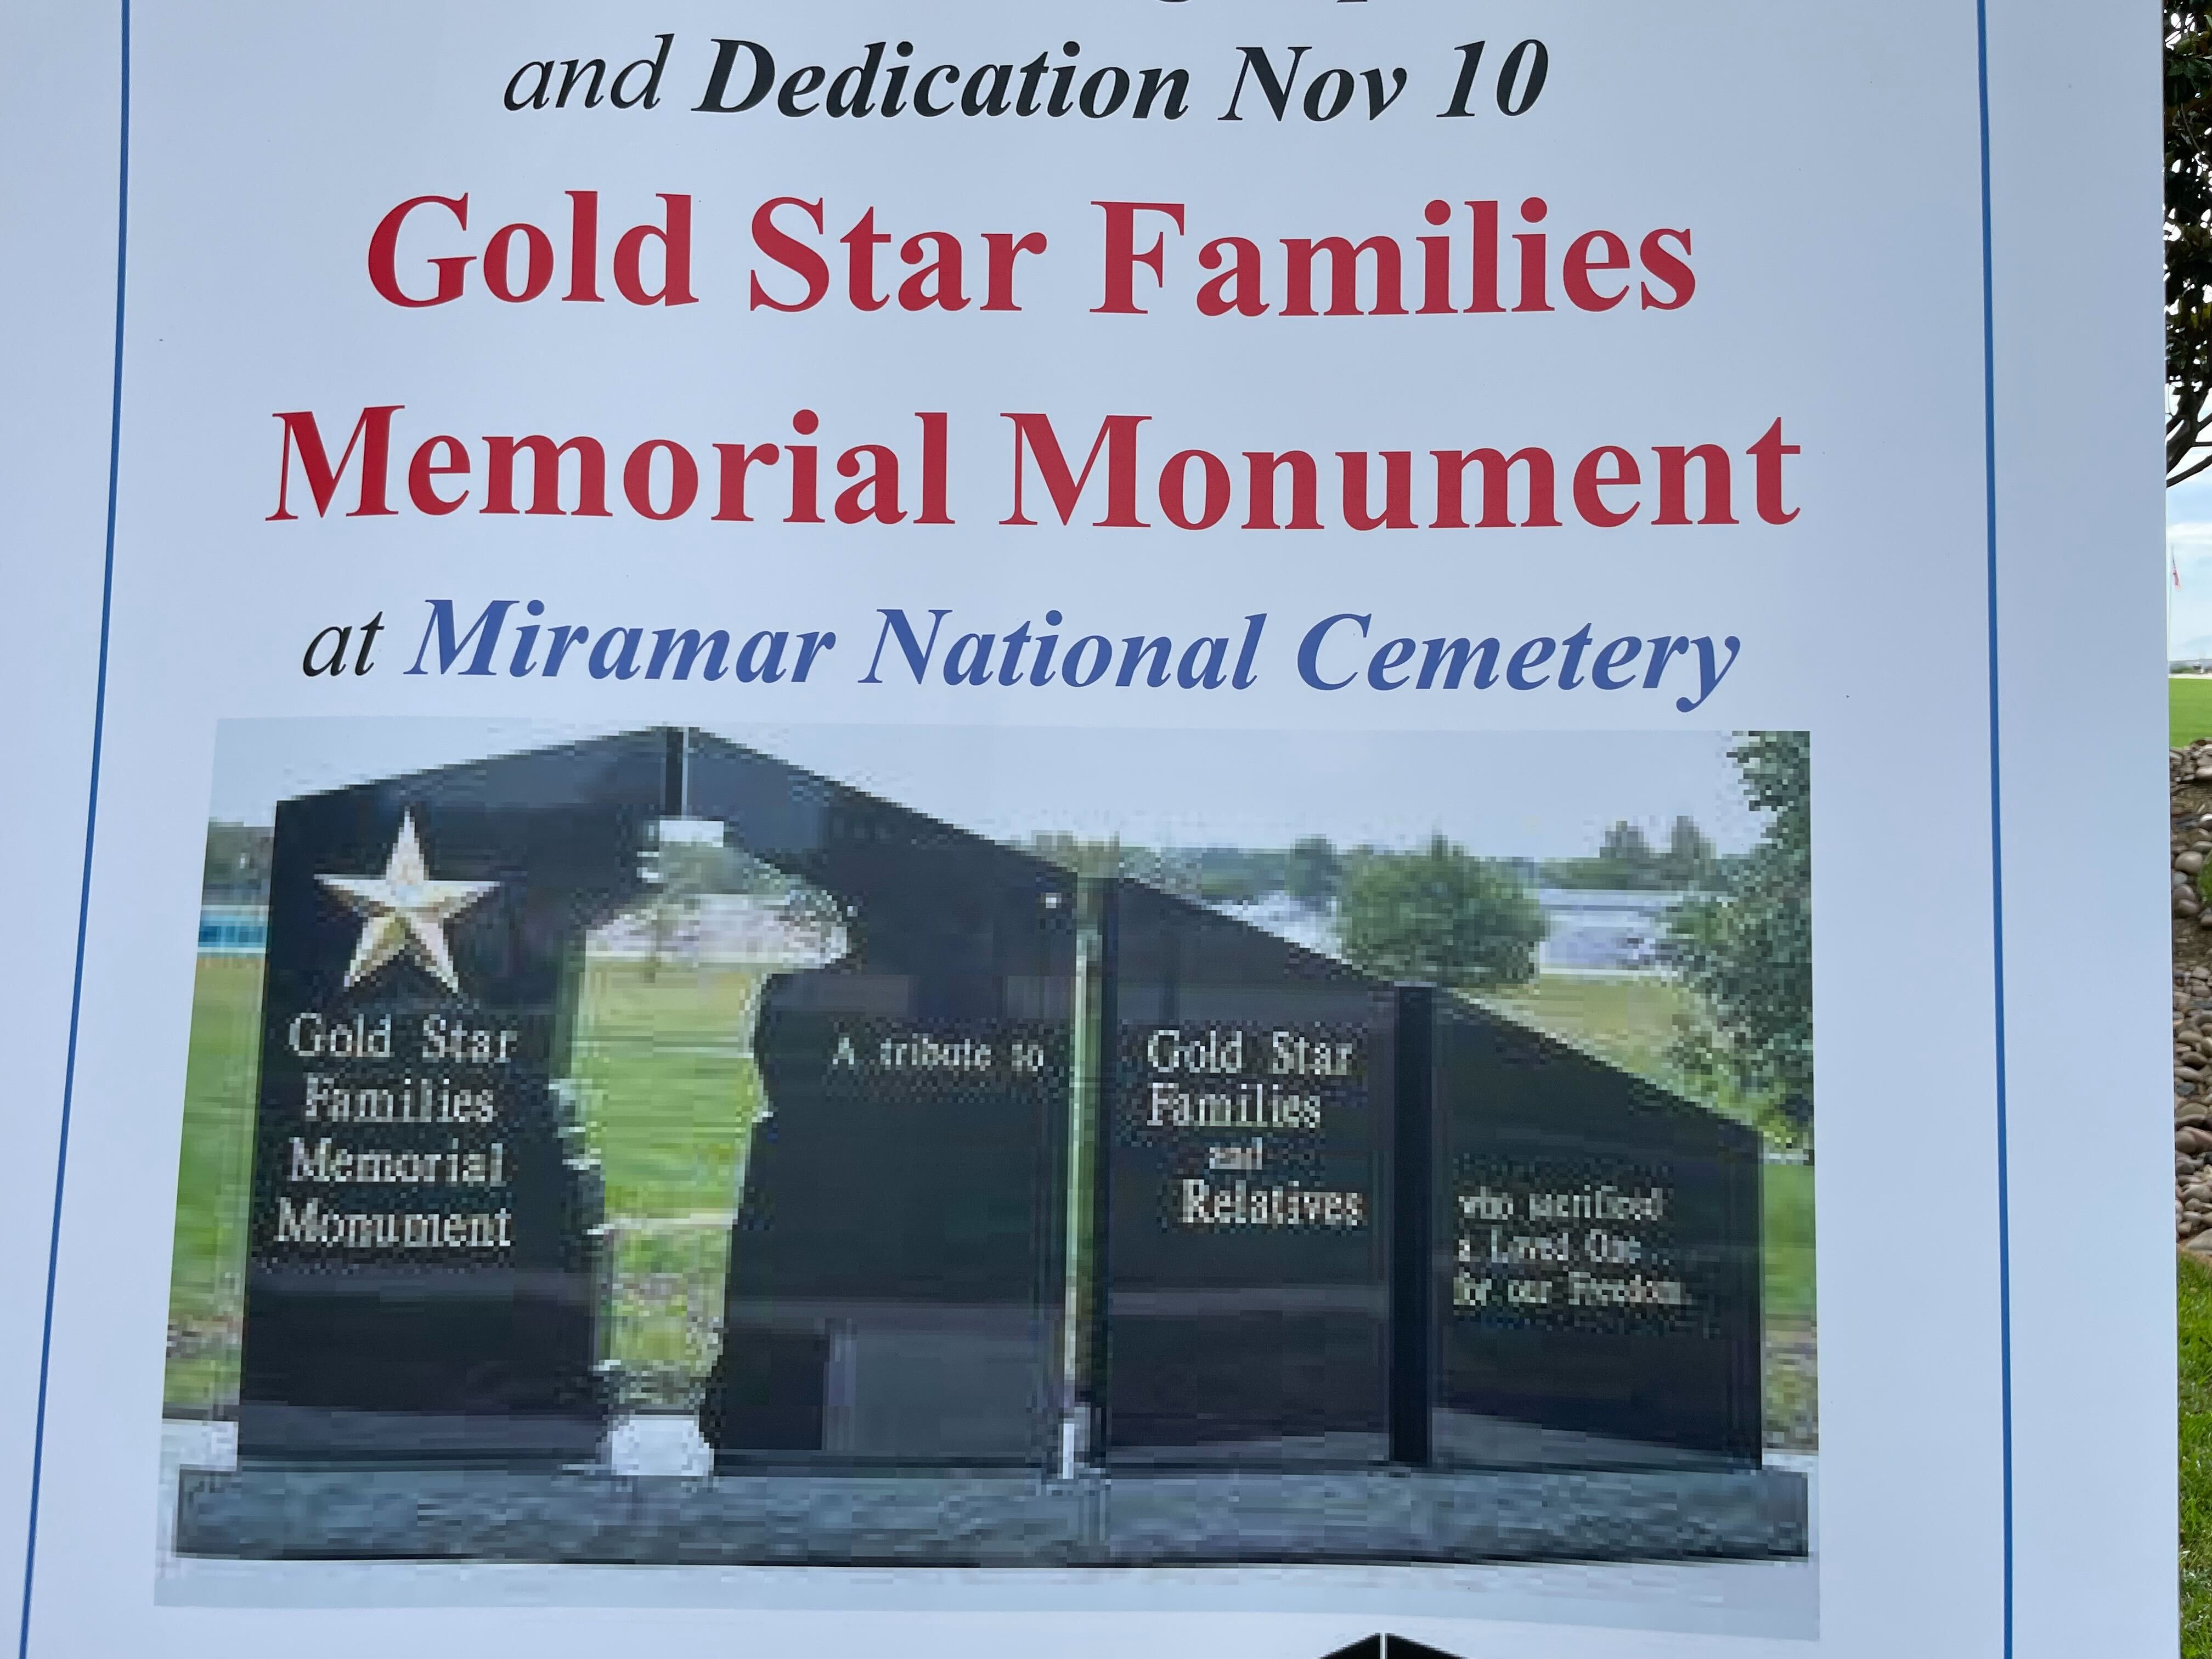 A sign depicts what the Gold Star Families Memorial Monument will look like at Miramar National Cemetery.